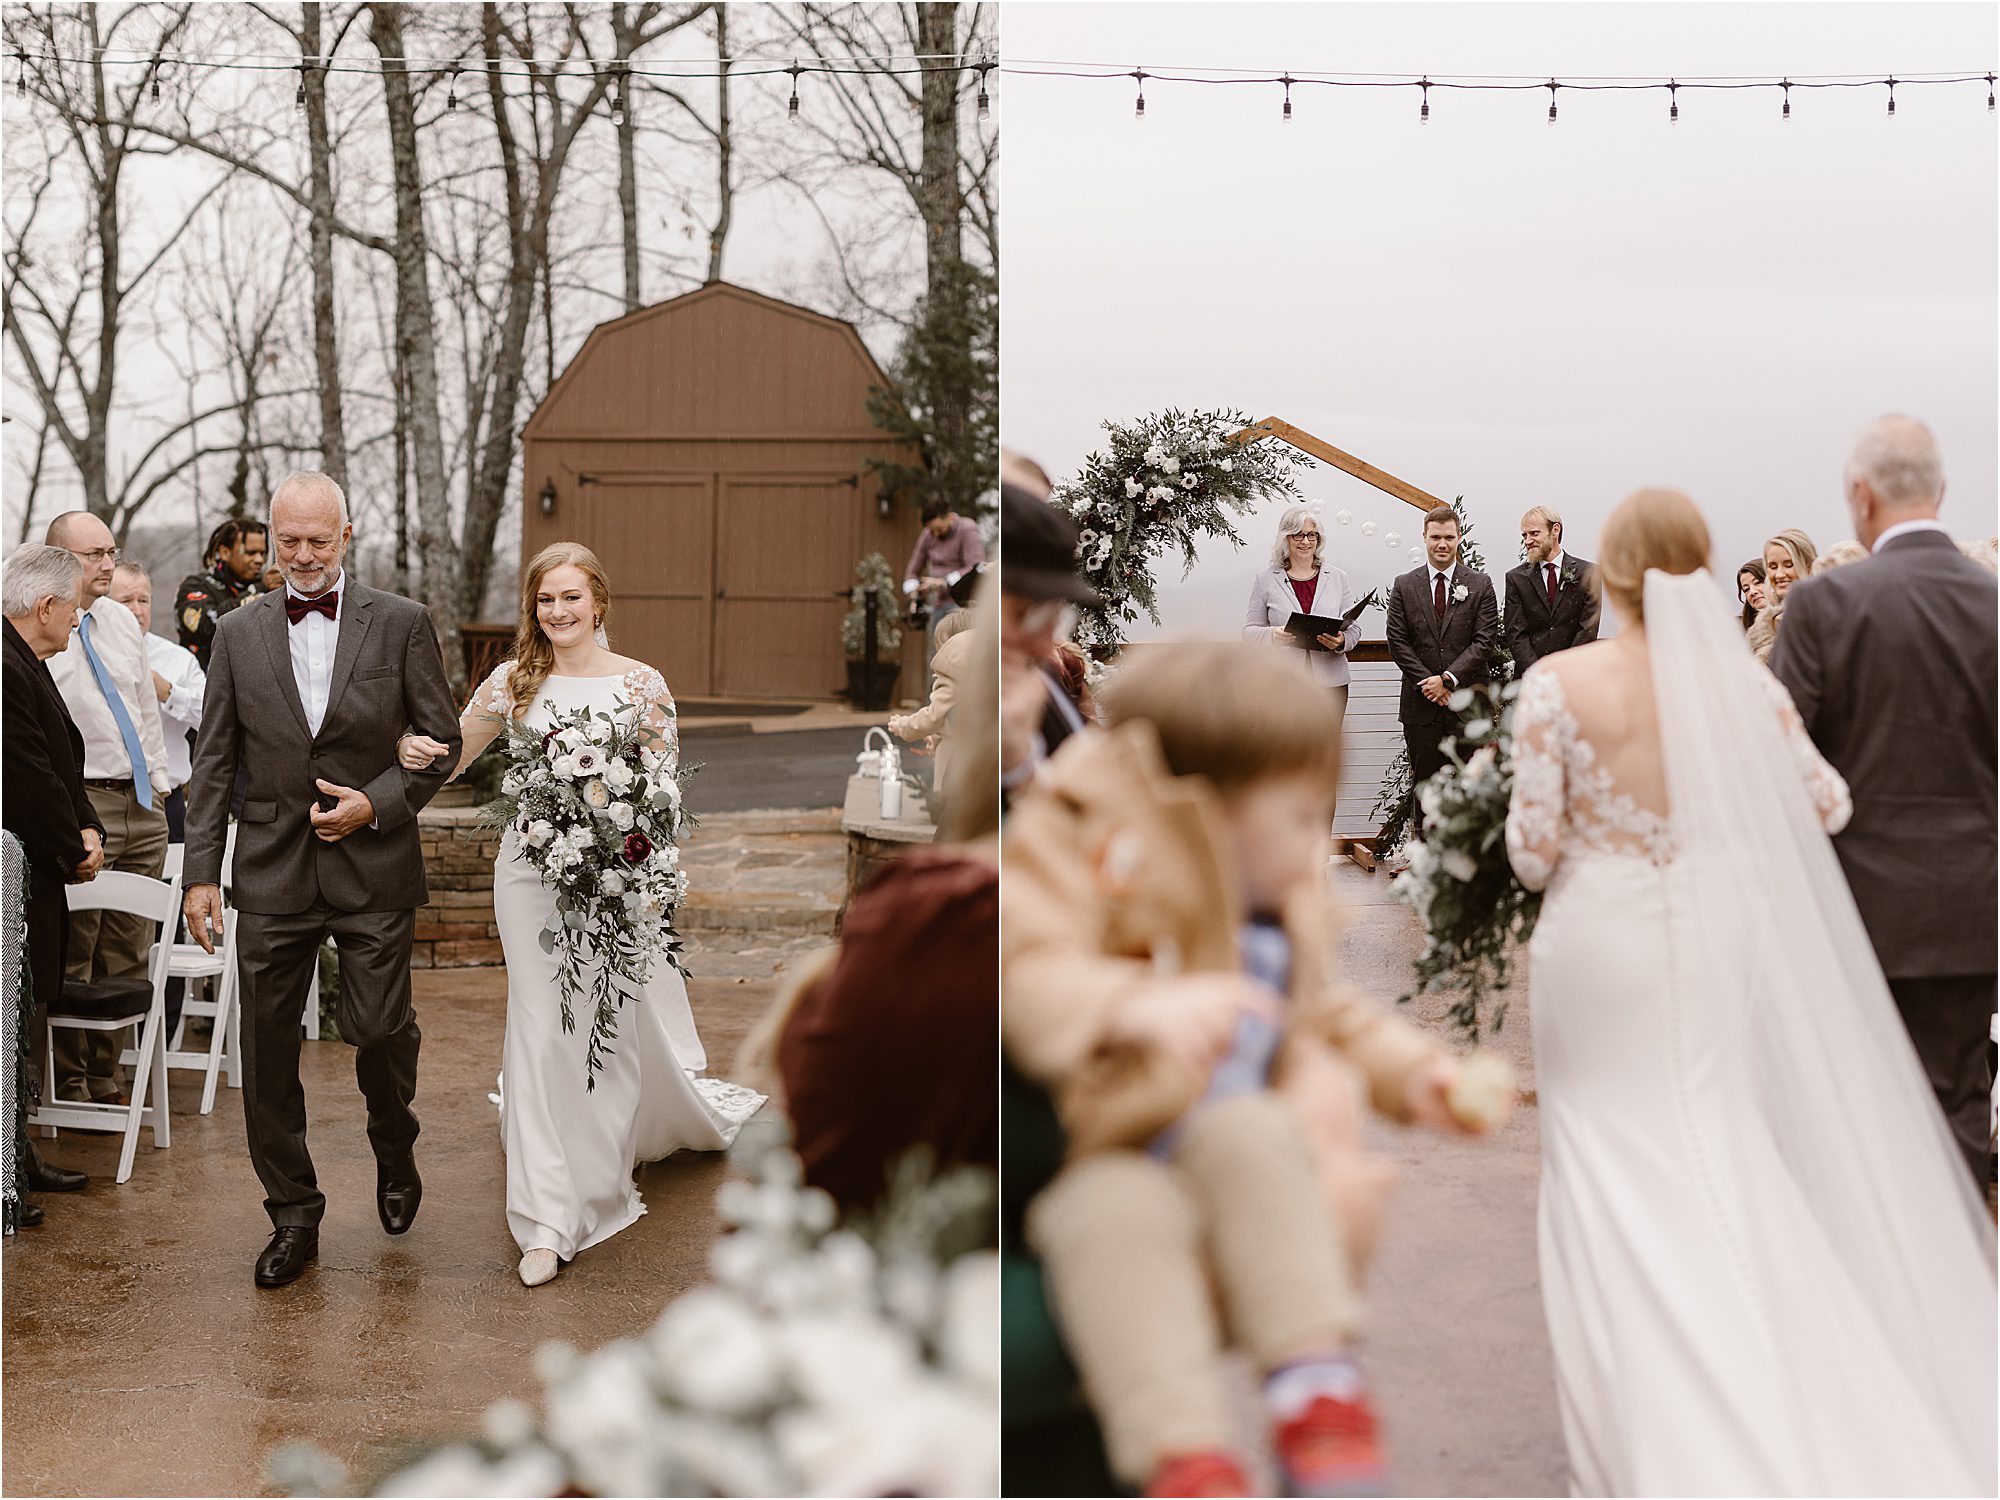 bride walking down aisle with father while groom awaits her